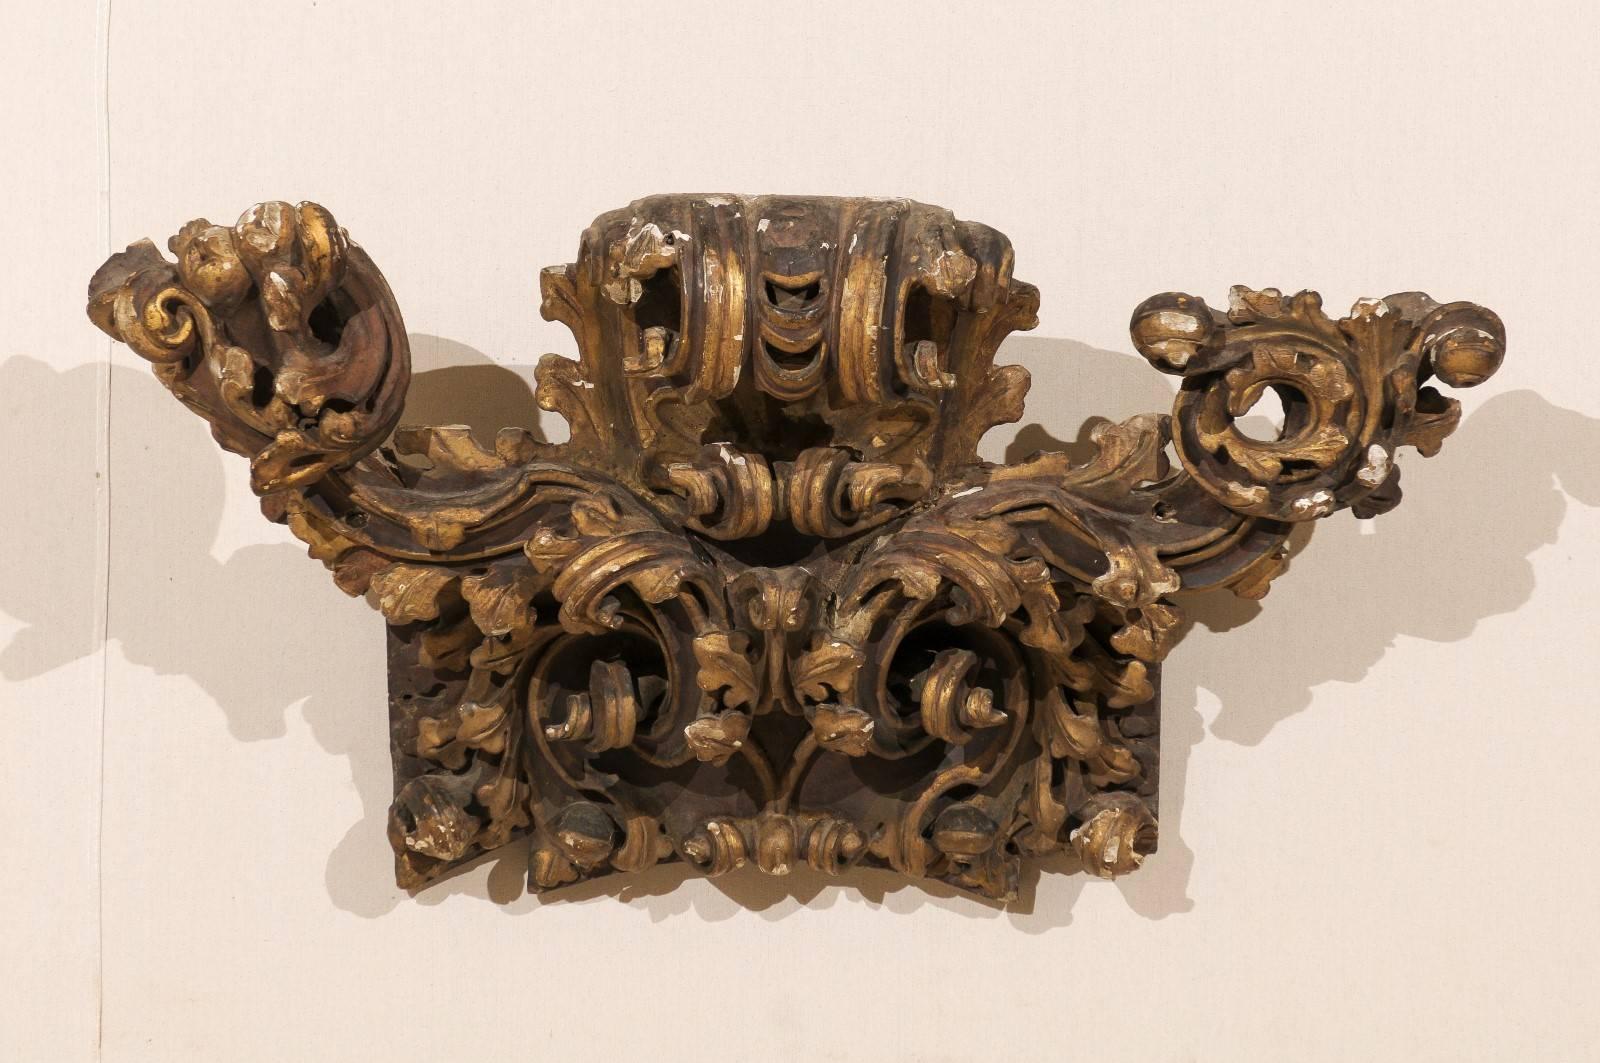 An Italian early 19th century giltwood fragment. This gilded wood Italian wall decoration features a Rococo style fragment made of various volutes. This piece also features richly carved acanthus leafs and other foliage motifs. This wall fragment